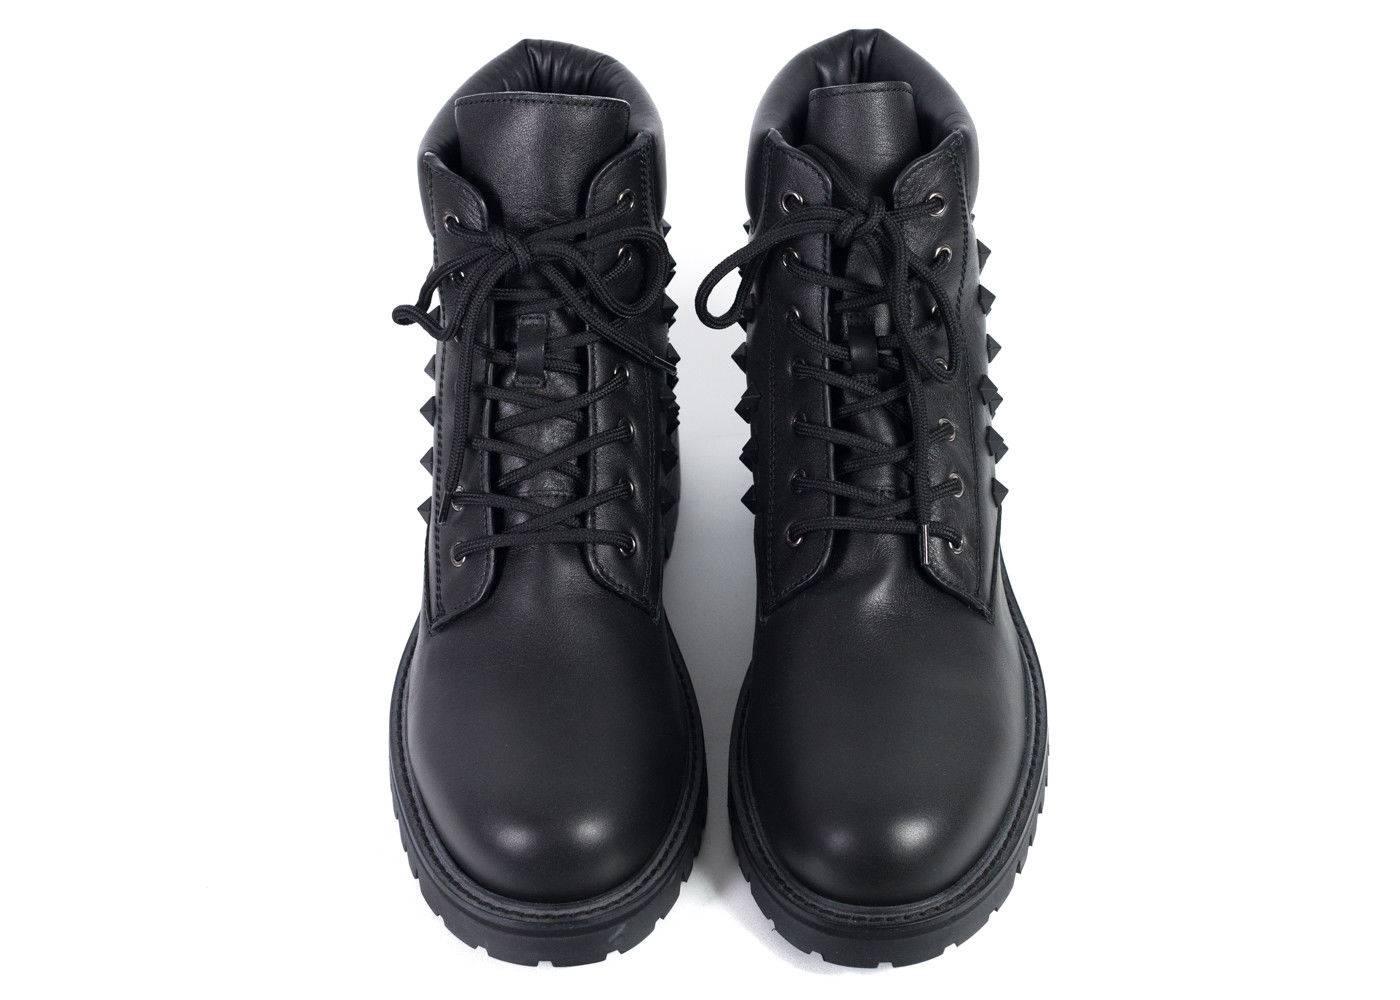 Brand New Valentino Men's Combat Boots
Original Box & Dust Bag Included
Retails in Stores & Online for $1345
Size IT42 / US9 Fits True to Size

Valentino's rendition of a classic black combat boot with their house's signature rocketed pyramids on